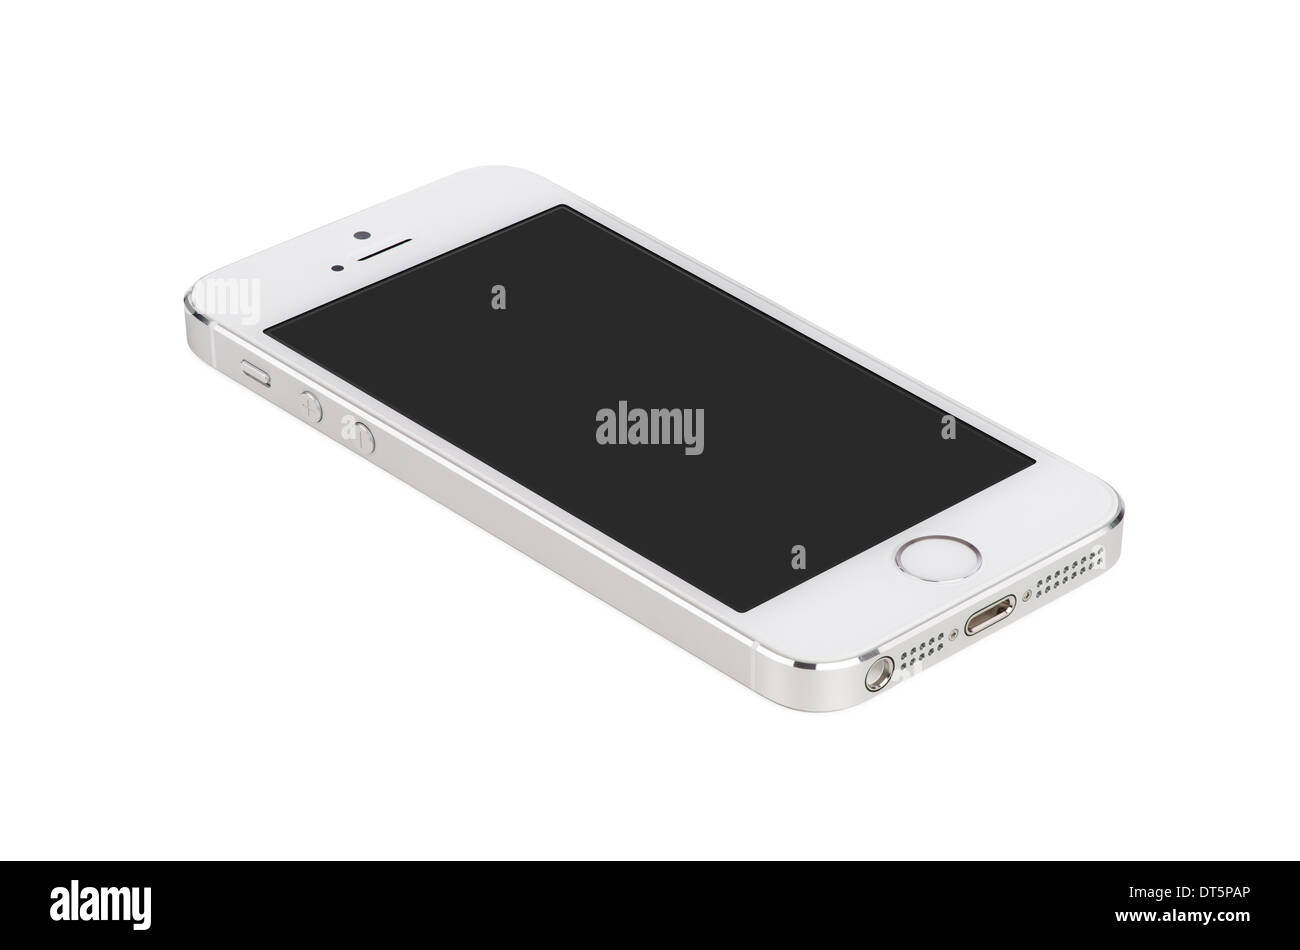 White modern smartphone with blank screen lies on the surface, isolated on white background. Whole image in focus, high quality. Stock Photo